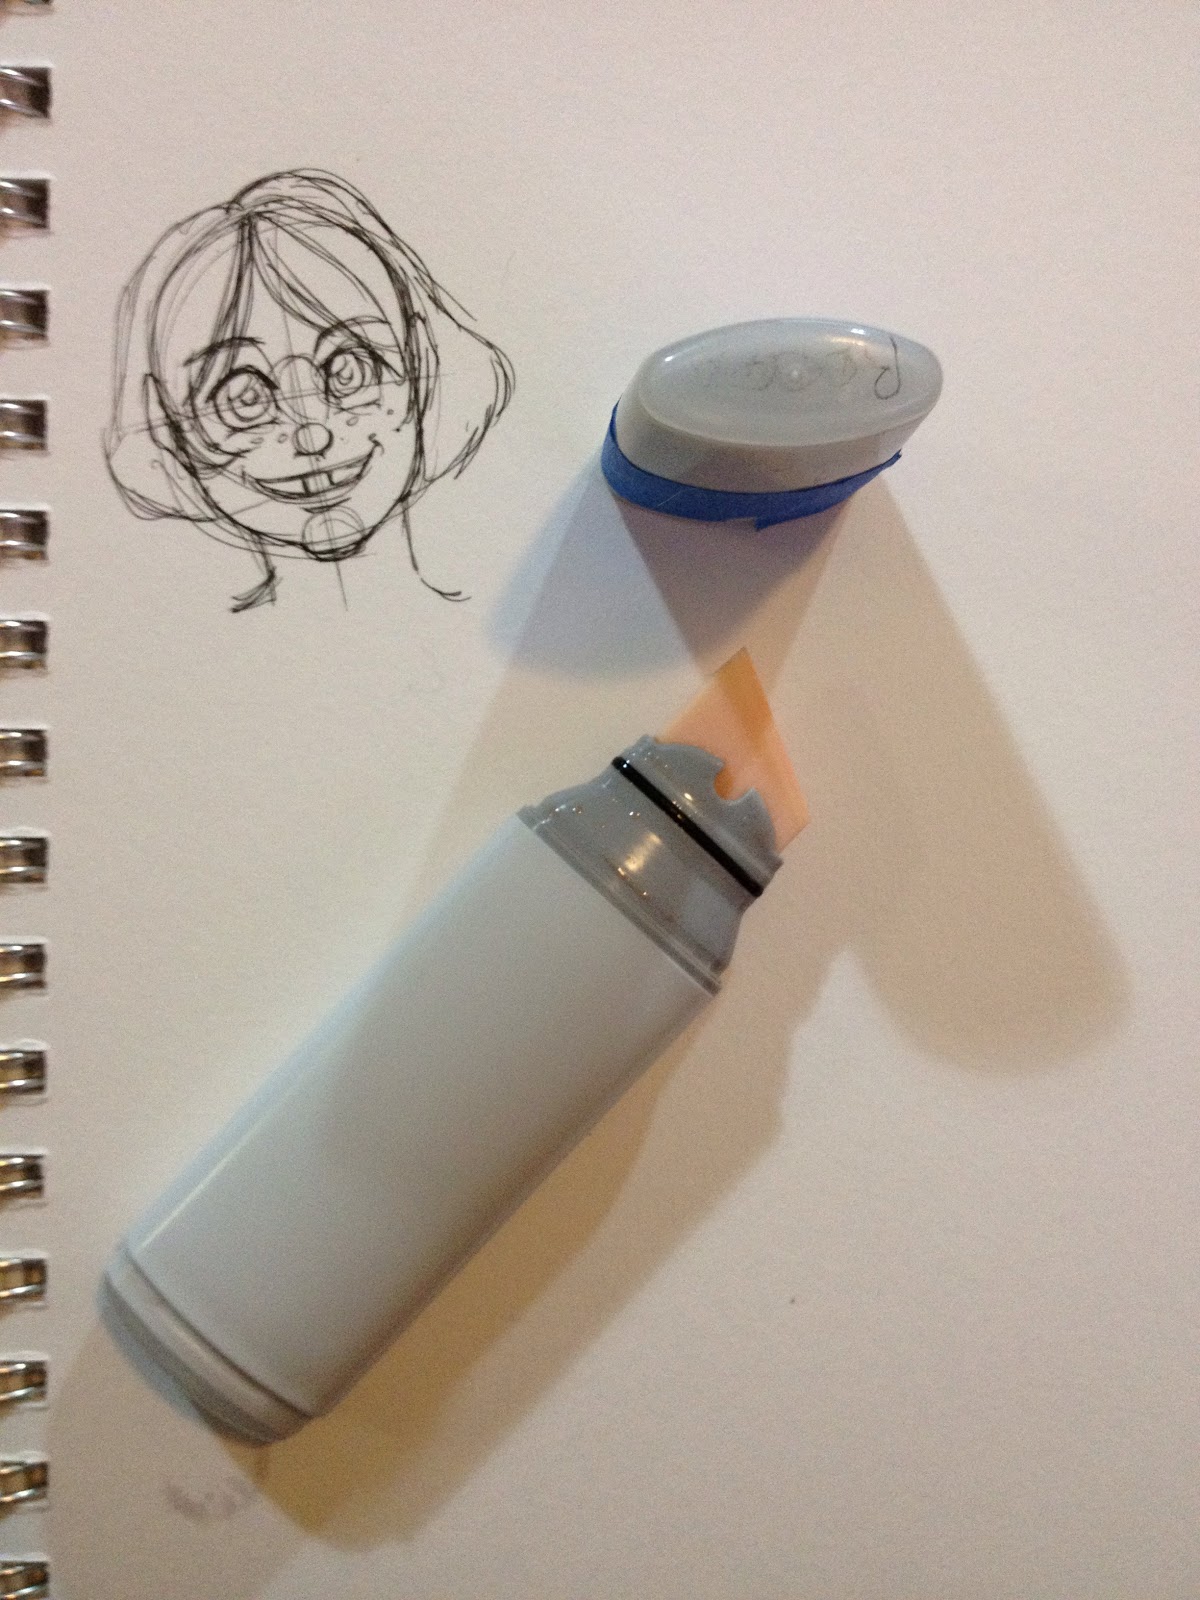 Marker Geek Monday: Painting with Copic Various Ink Refills